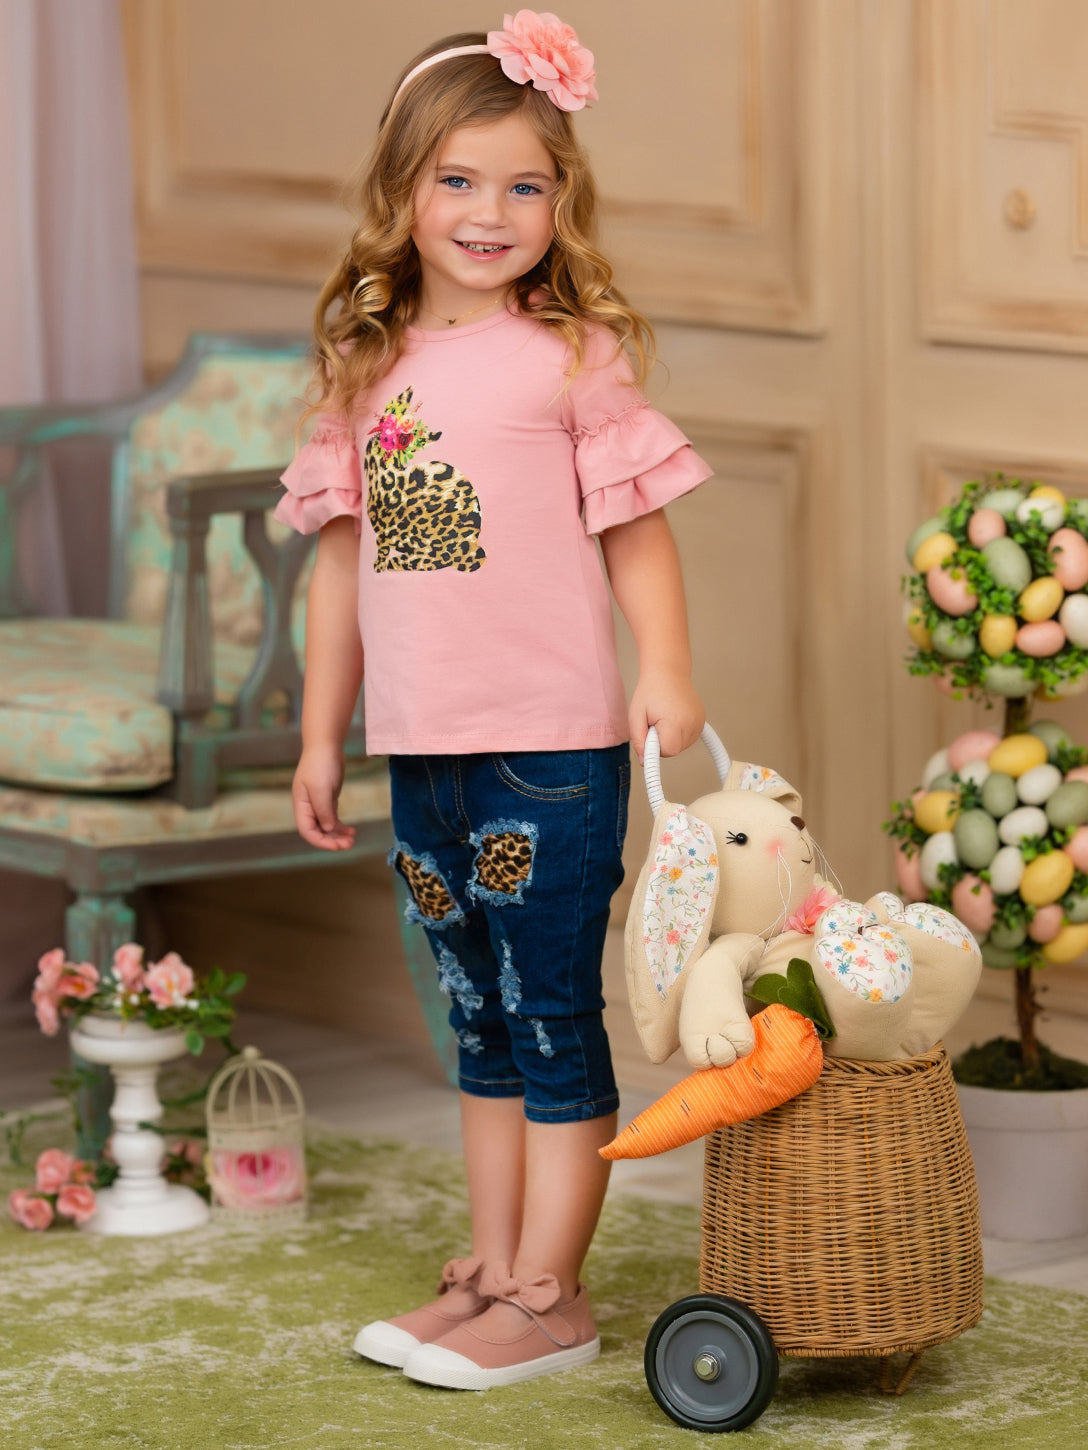 Girls Easter-themed set features a ruffled sleeve top with a leopard print bunny graphic and patched denim capris with a leopard print sash belt for 2T to 10Y toddlers and girls